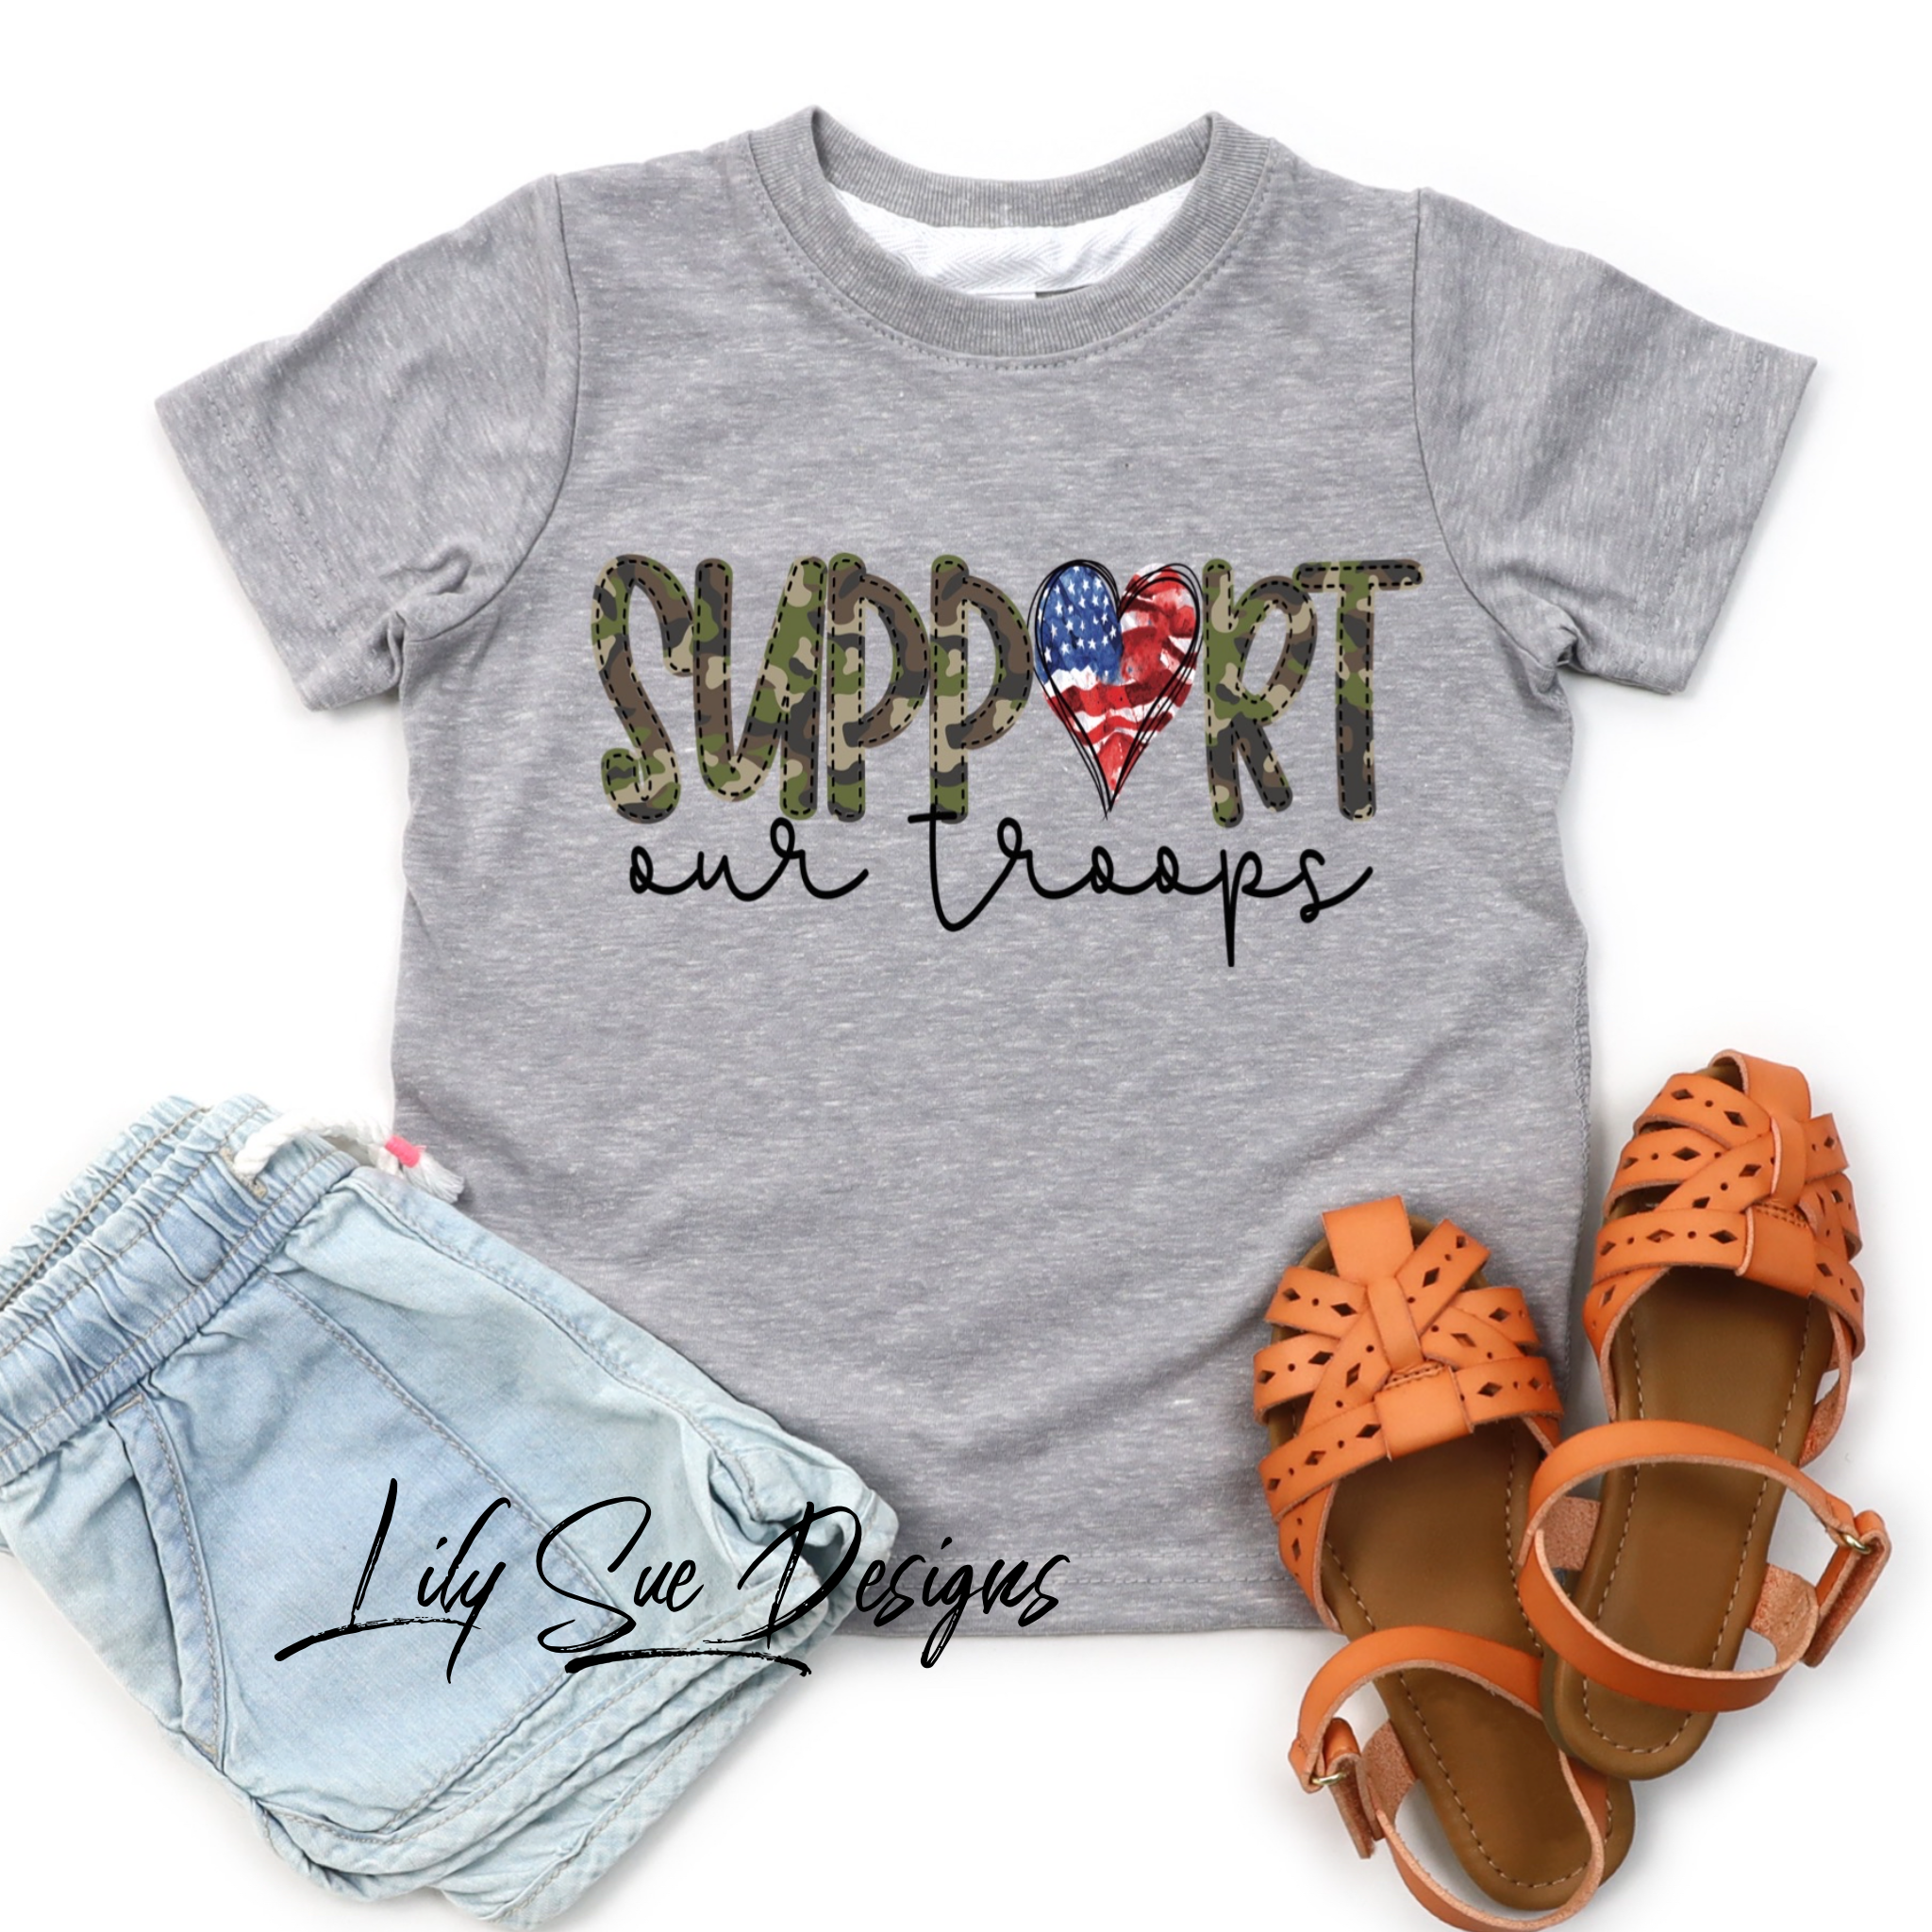 Support our troops Kids Short Sleeve Tee